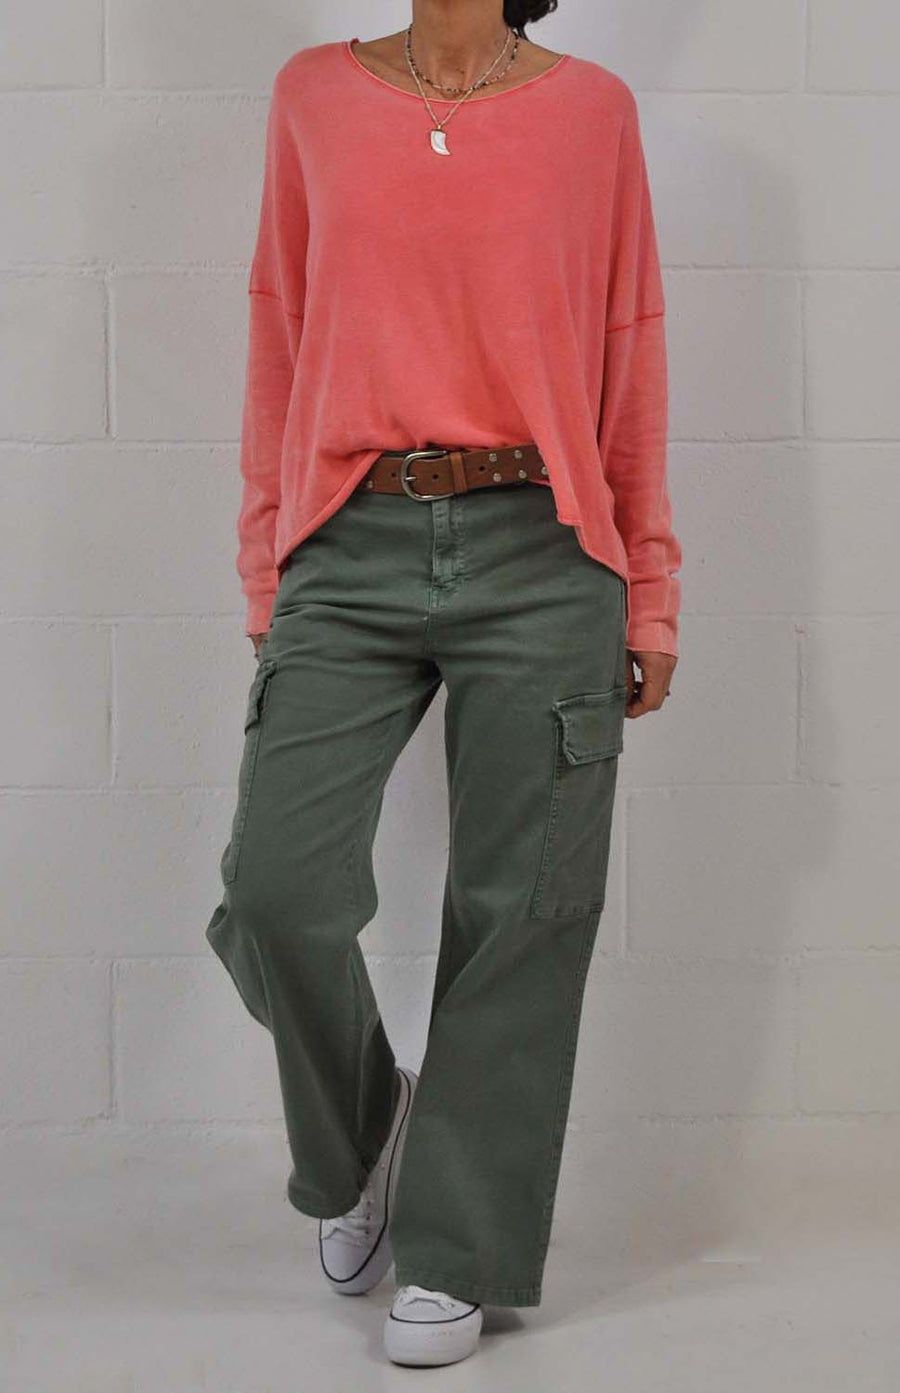 Make a Style statement with Cargo pants
for women !